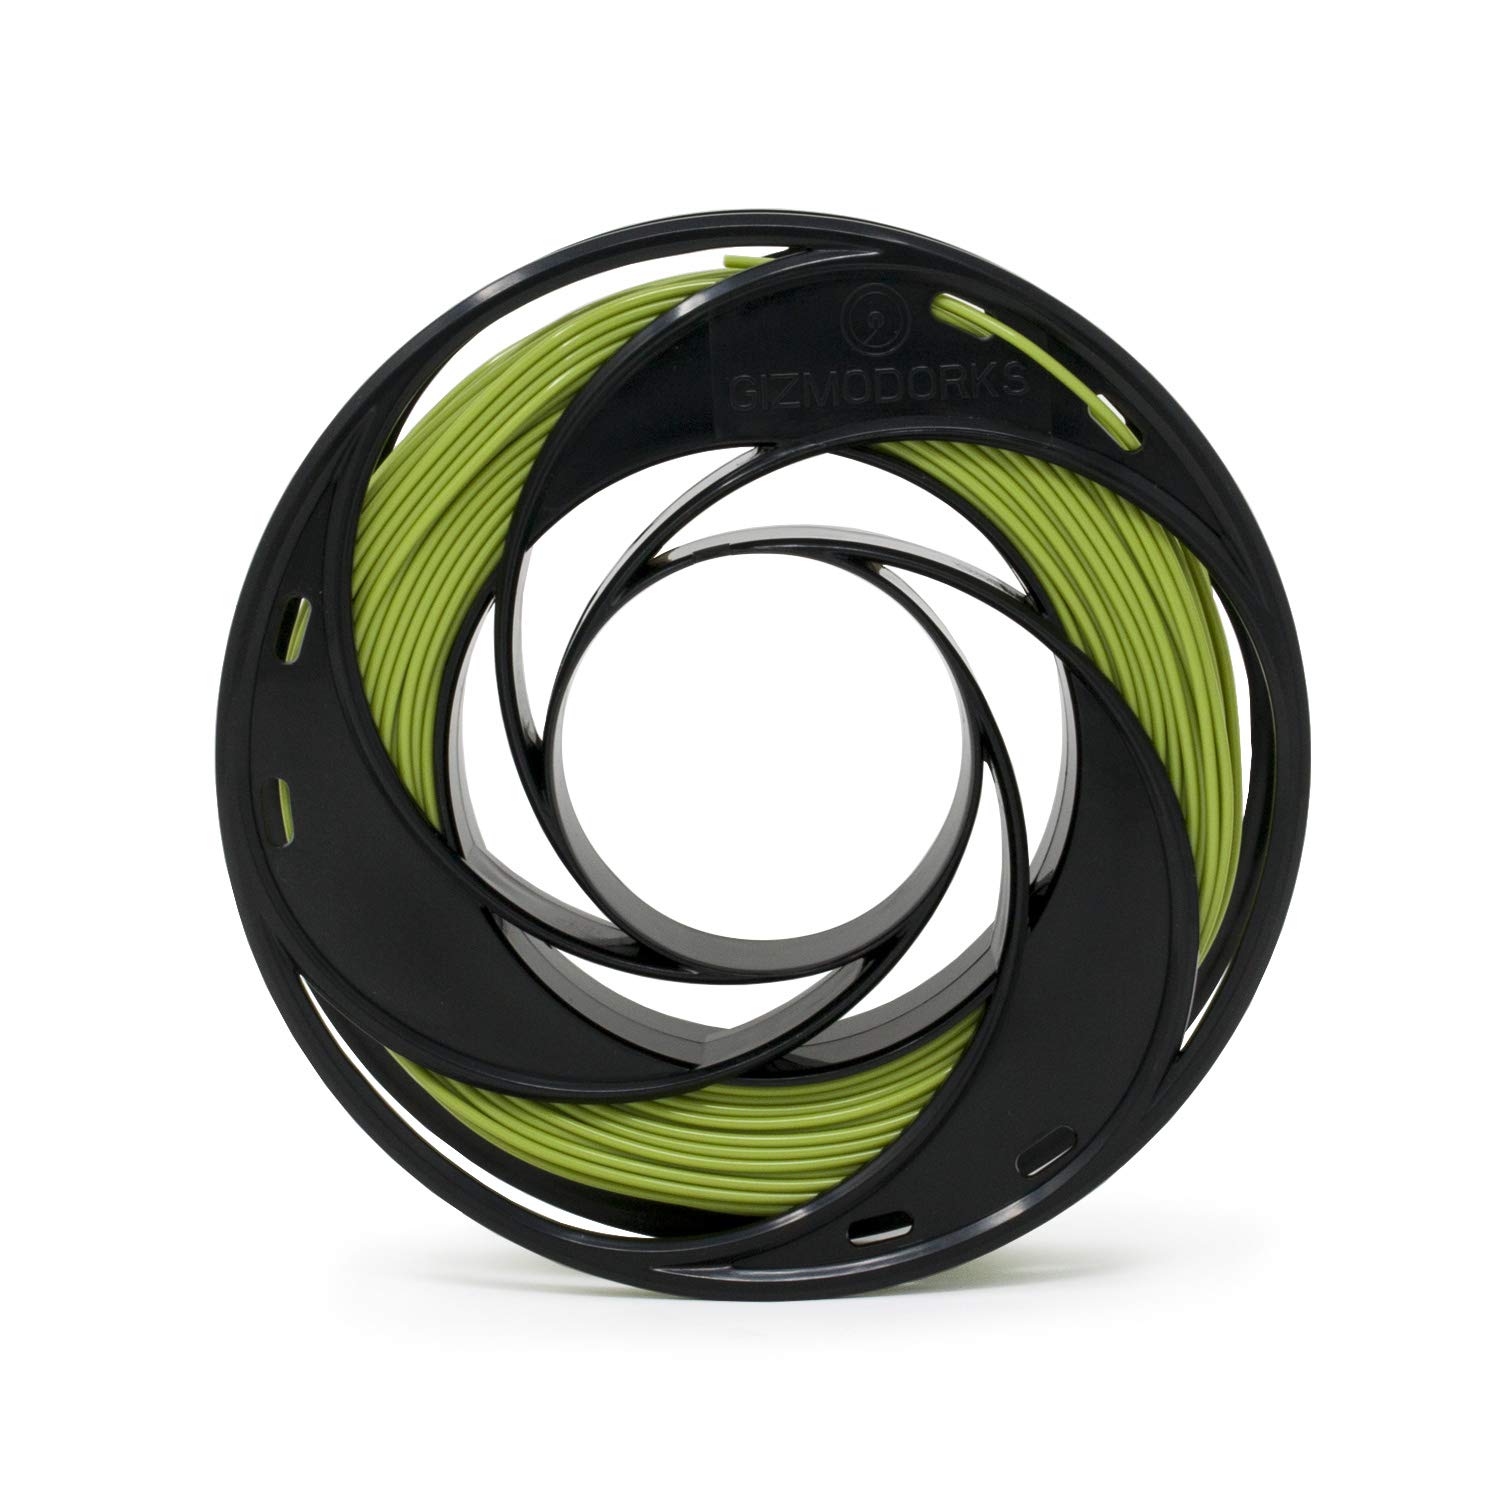 Gizmo Dorks PLA Filament 1.75mm 200g for 3D Printers, Heat Color Change Green to Yellow